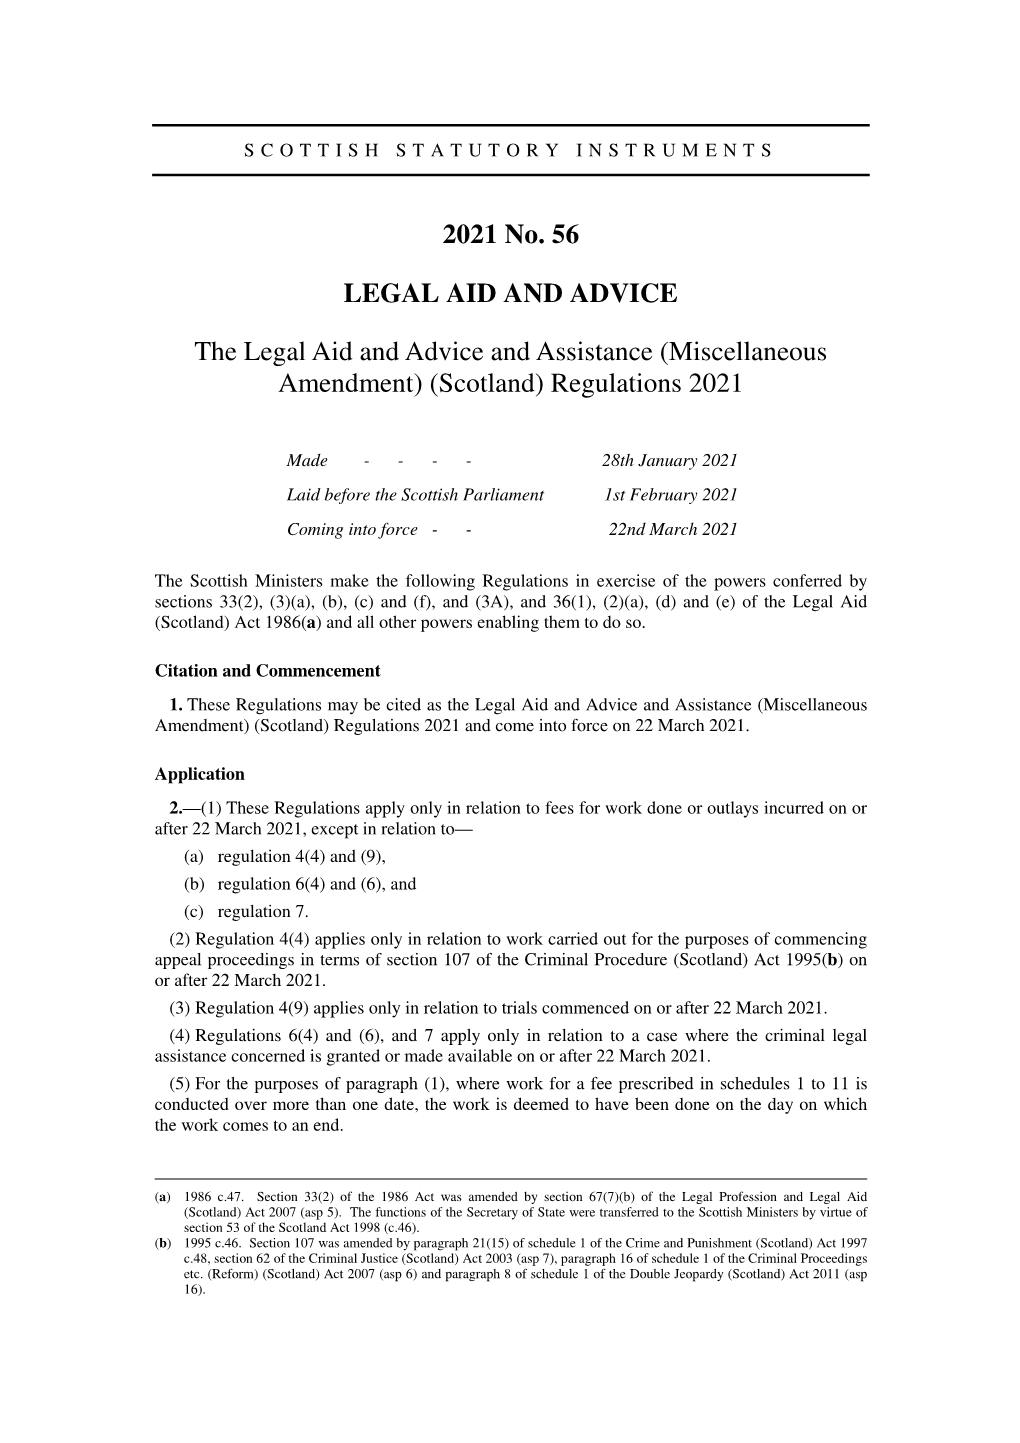 The Legal Aid and Advice and Assistance (Miscellaneous Amendment) (Scotland) Regulations 2021